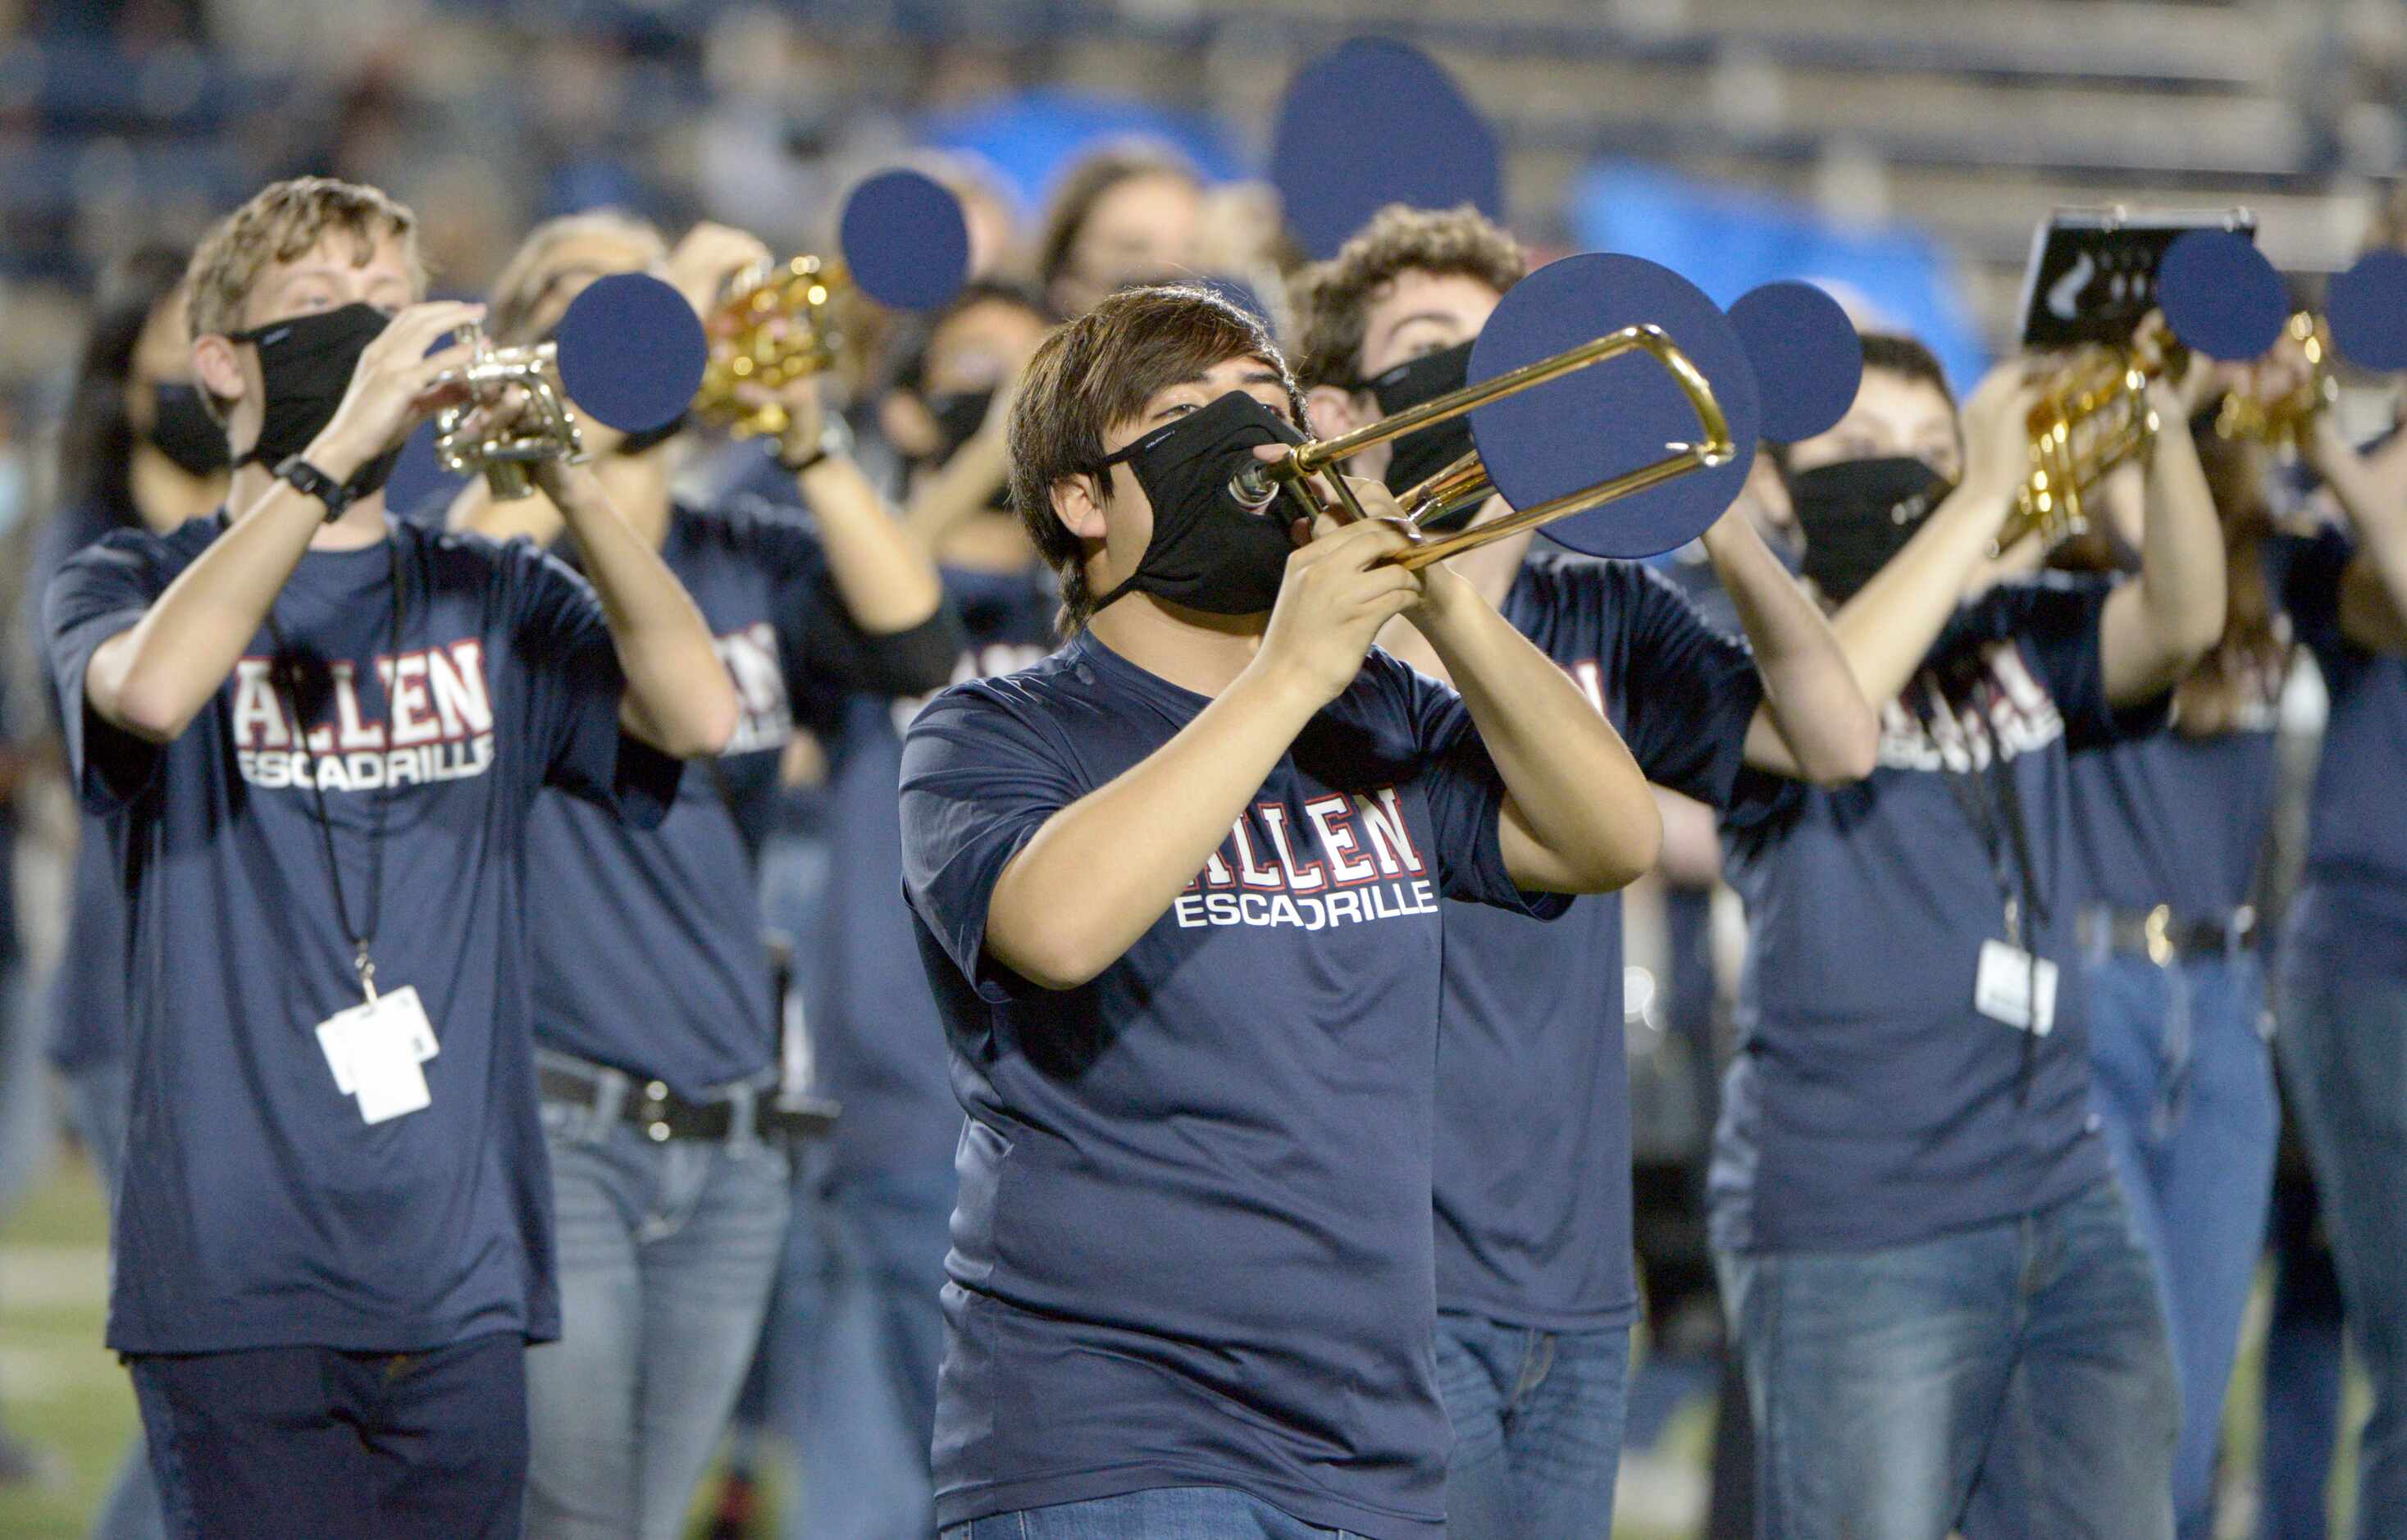 Members of the Allen Escadrille perform at halftime of a high school football game between...